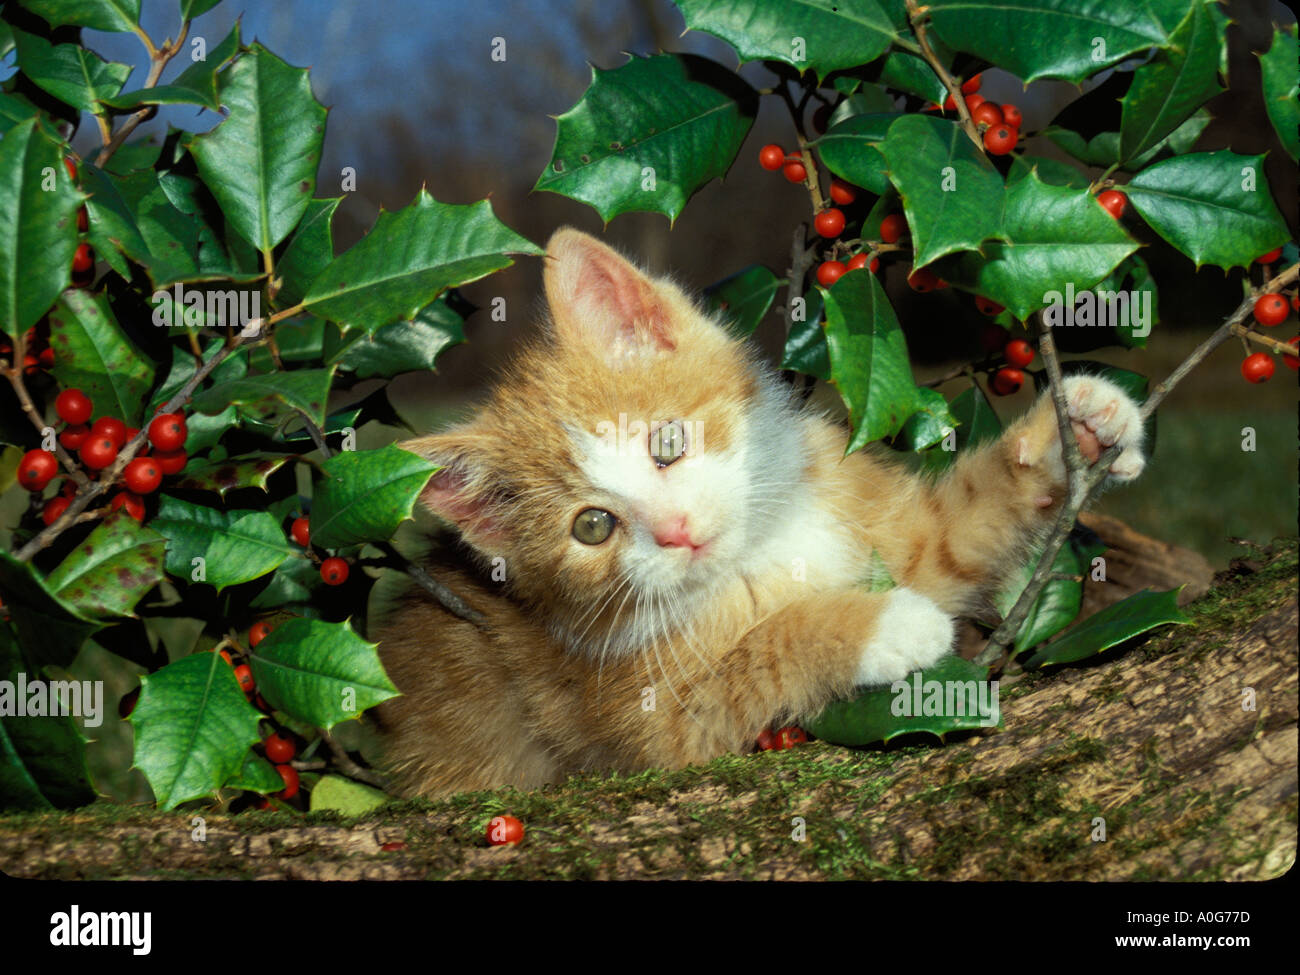 Yellow and orange kitten playing by holly with red berries, Missouri USA Stock Photo